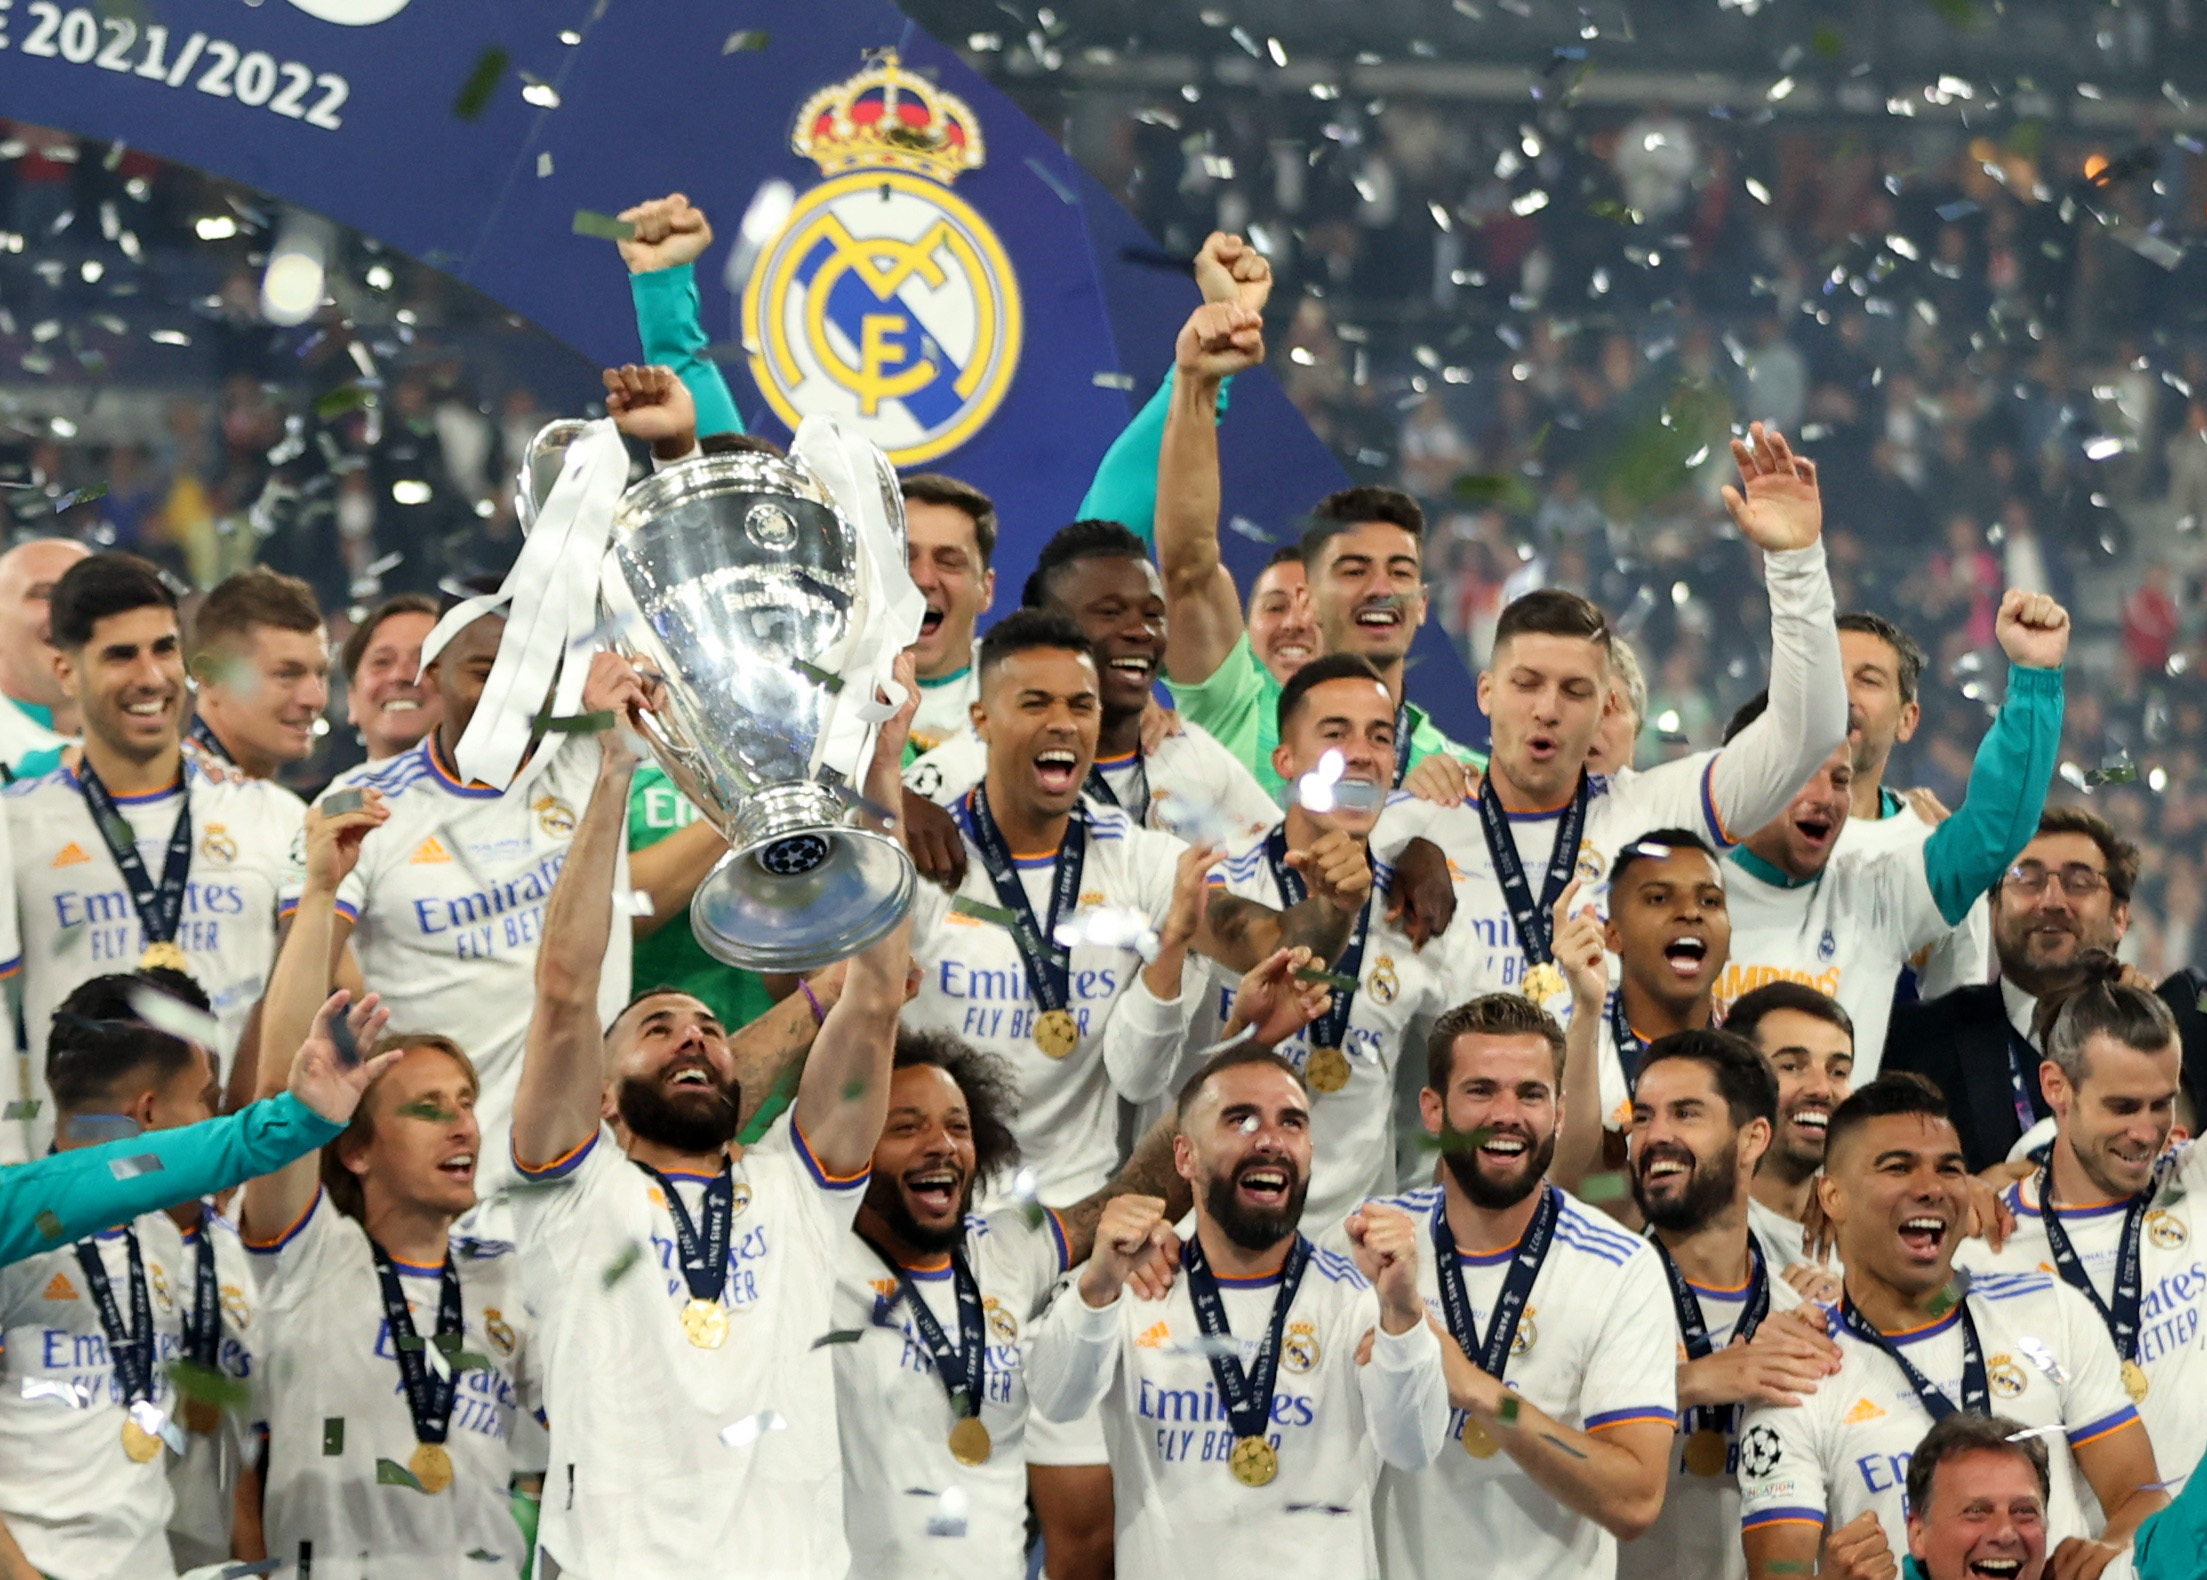 Soccer Football - Champions League Final - Liverpool v Real Madrid - Stade de France, Saint-Denis near Paris, France - May 28, 2022 Real Madrid's Karim Benzema celebrates winning the champions league with the trophy and teammates REUTERS/Molly Darlington